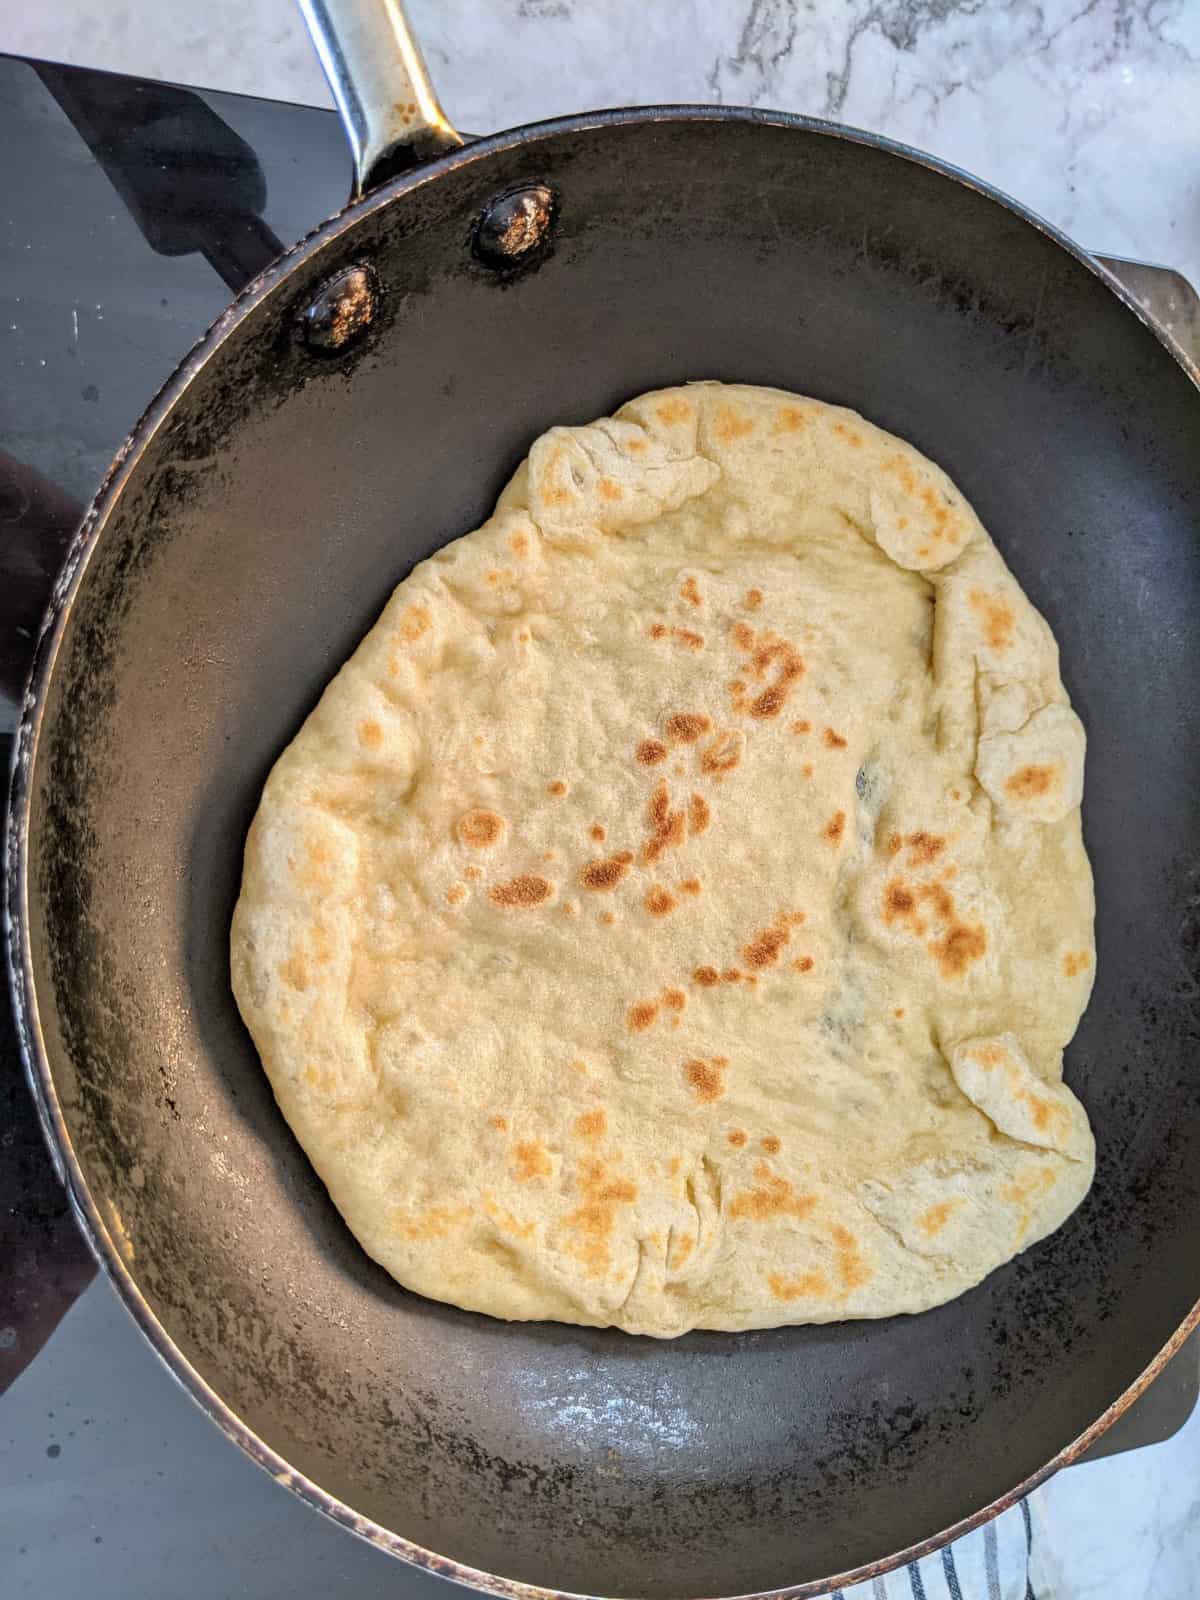 Pita bread on pan with one side already cooked